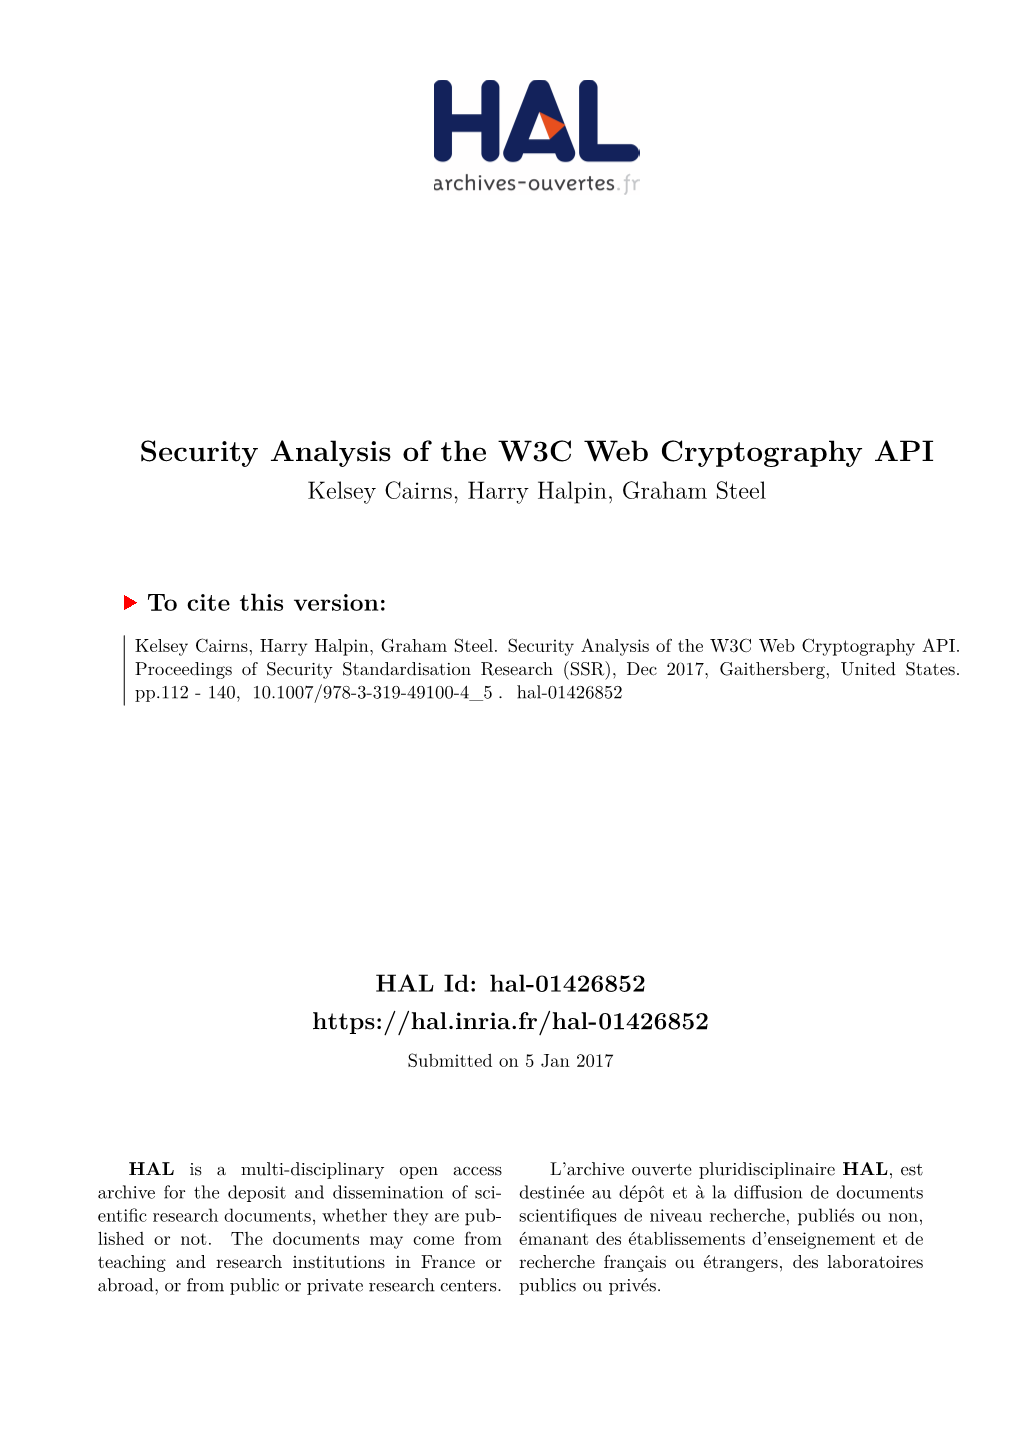 Security Analysis of the W3C Web Cryptography API Kelsey Cairns, Harry Halpin, Graham Steel